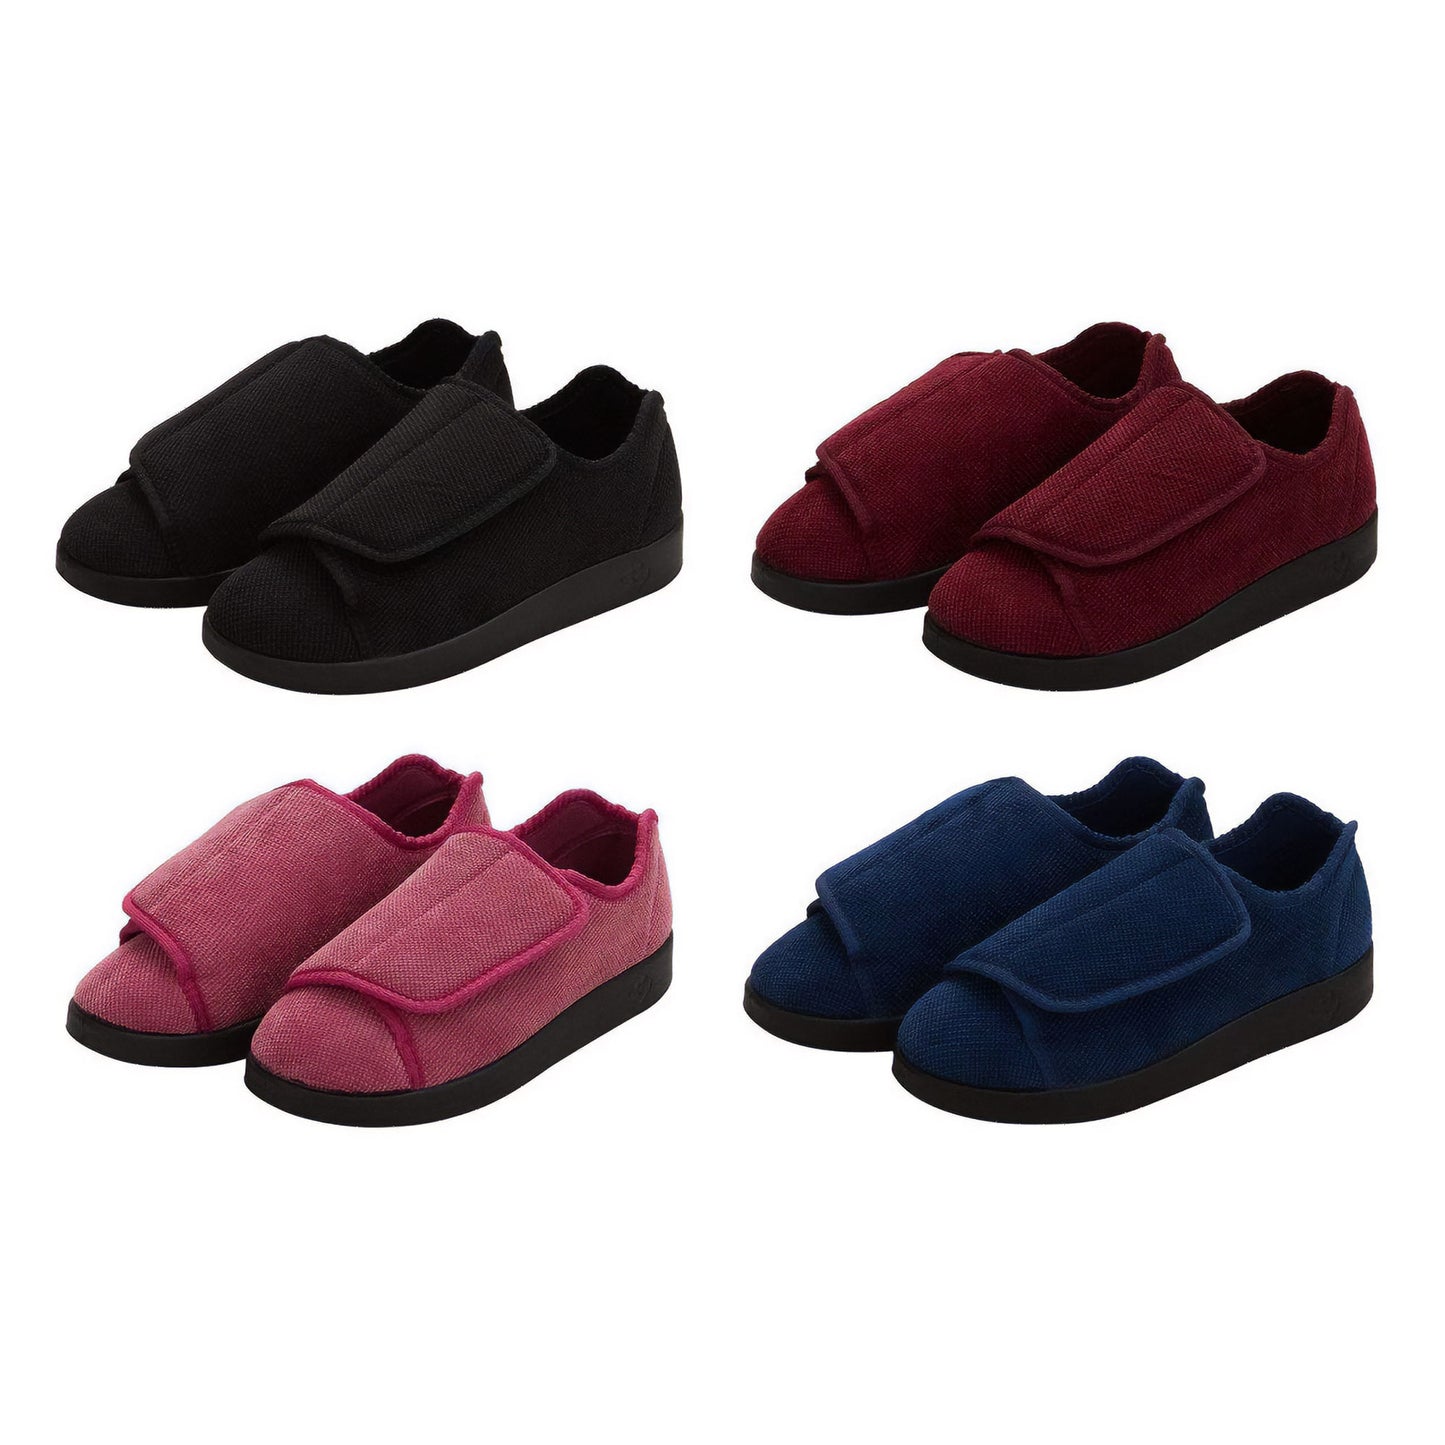 Women's Antimicrobial Extra Extra Wide Easy-Closure Slippers